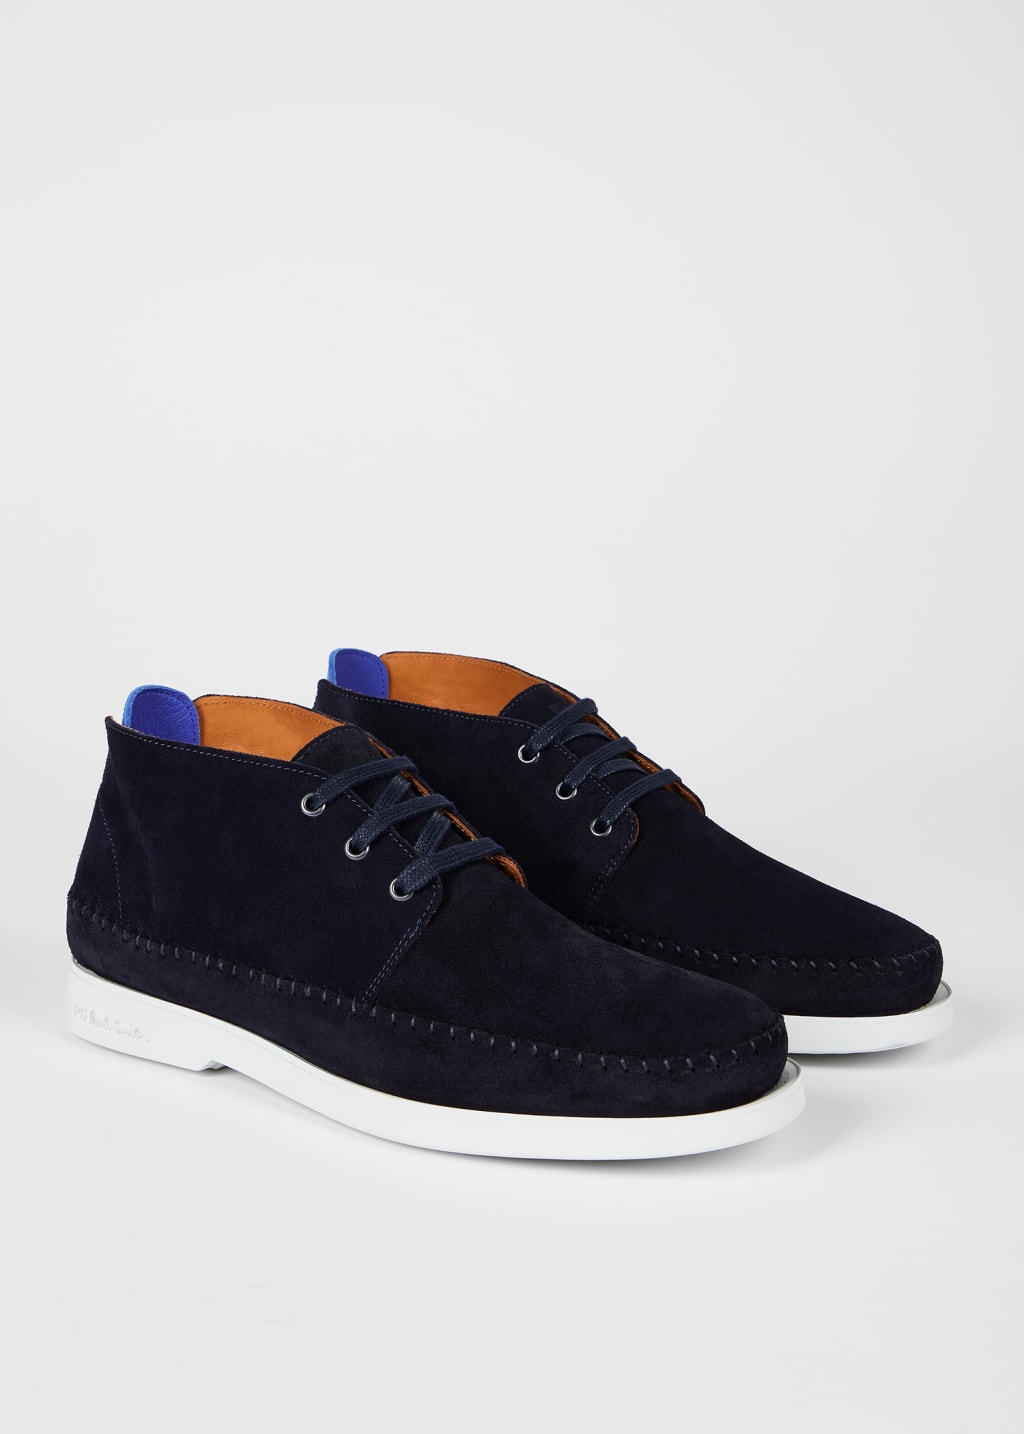 Product View - Navy Suede 'Crane' Boots Paul Smith